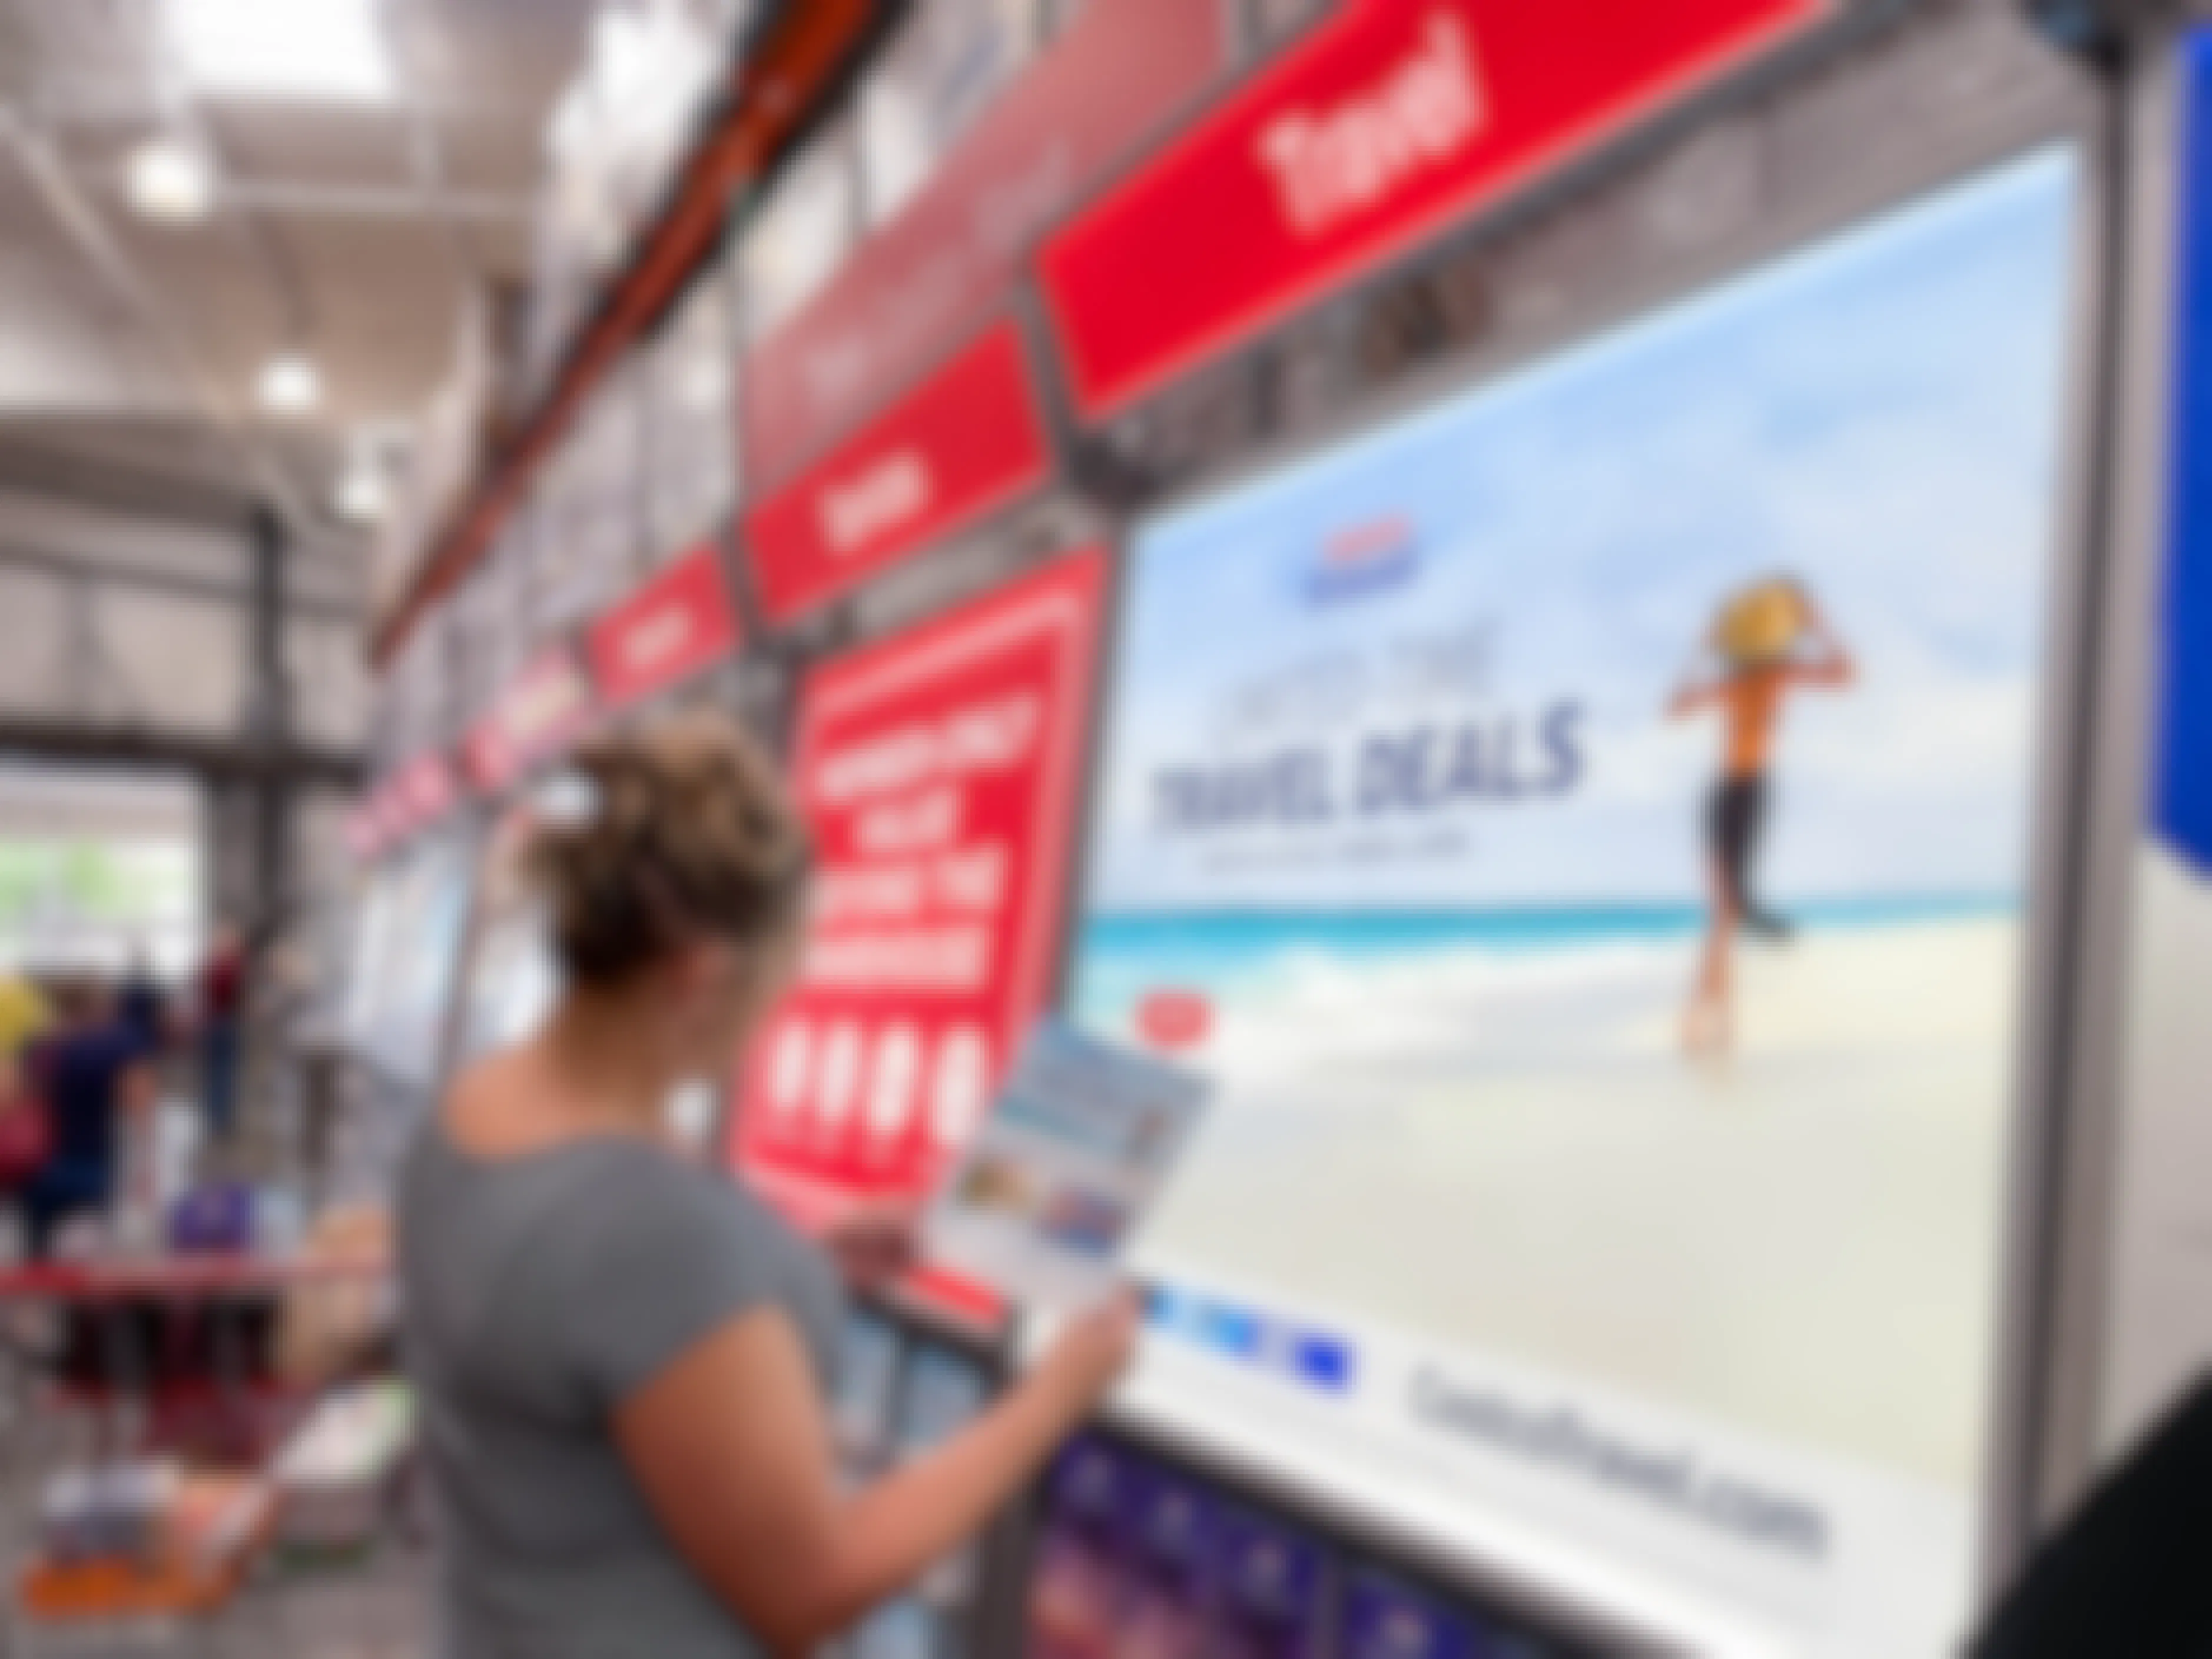 costco travel brochures on being opened in store